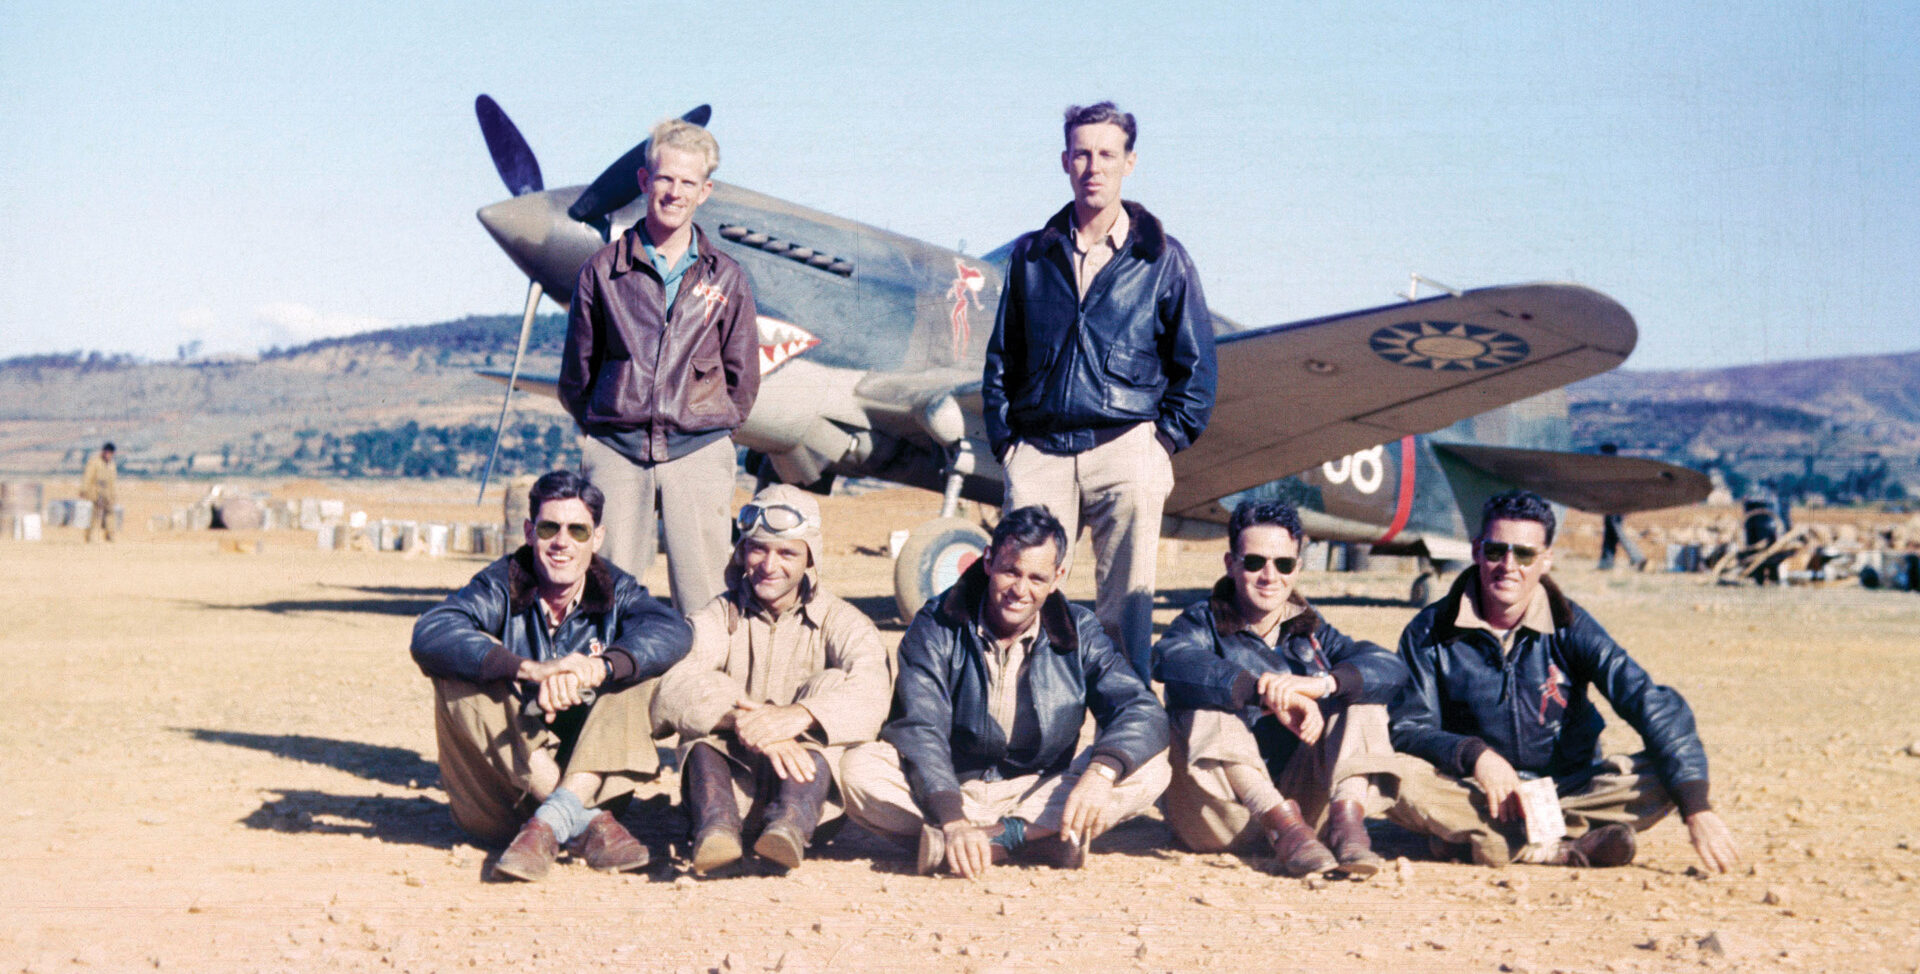 During a refueling stop at an airfield in Yunnan-Yi, China, Erik Shilling stands at left, next to Arvid Olsen, pilot of plane sitting in the background. Seated, left to right, are other members of the AVG: R.T. Smith, Ken Jernstedt, Bob Prescott, Link Laughlin, and Bill Reed.